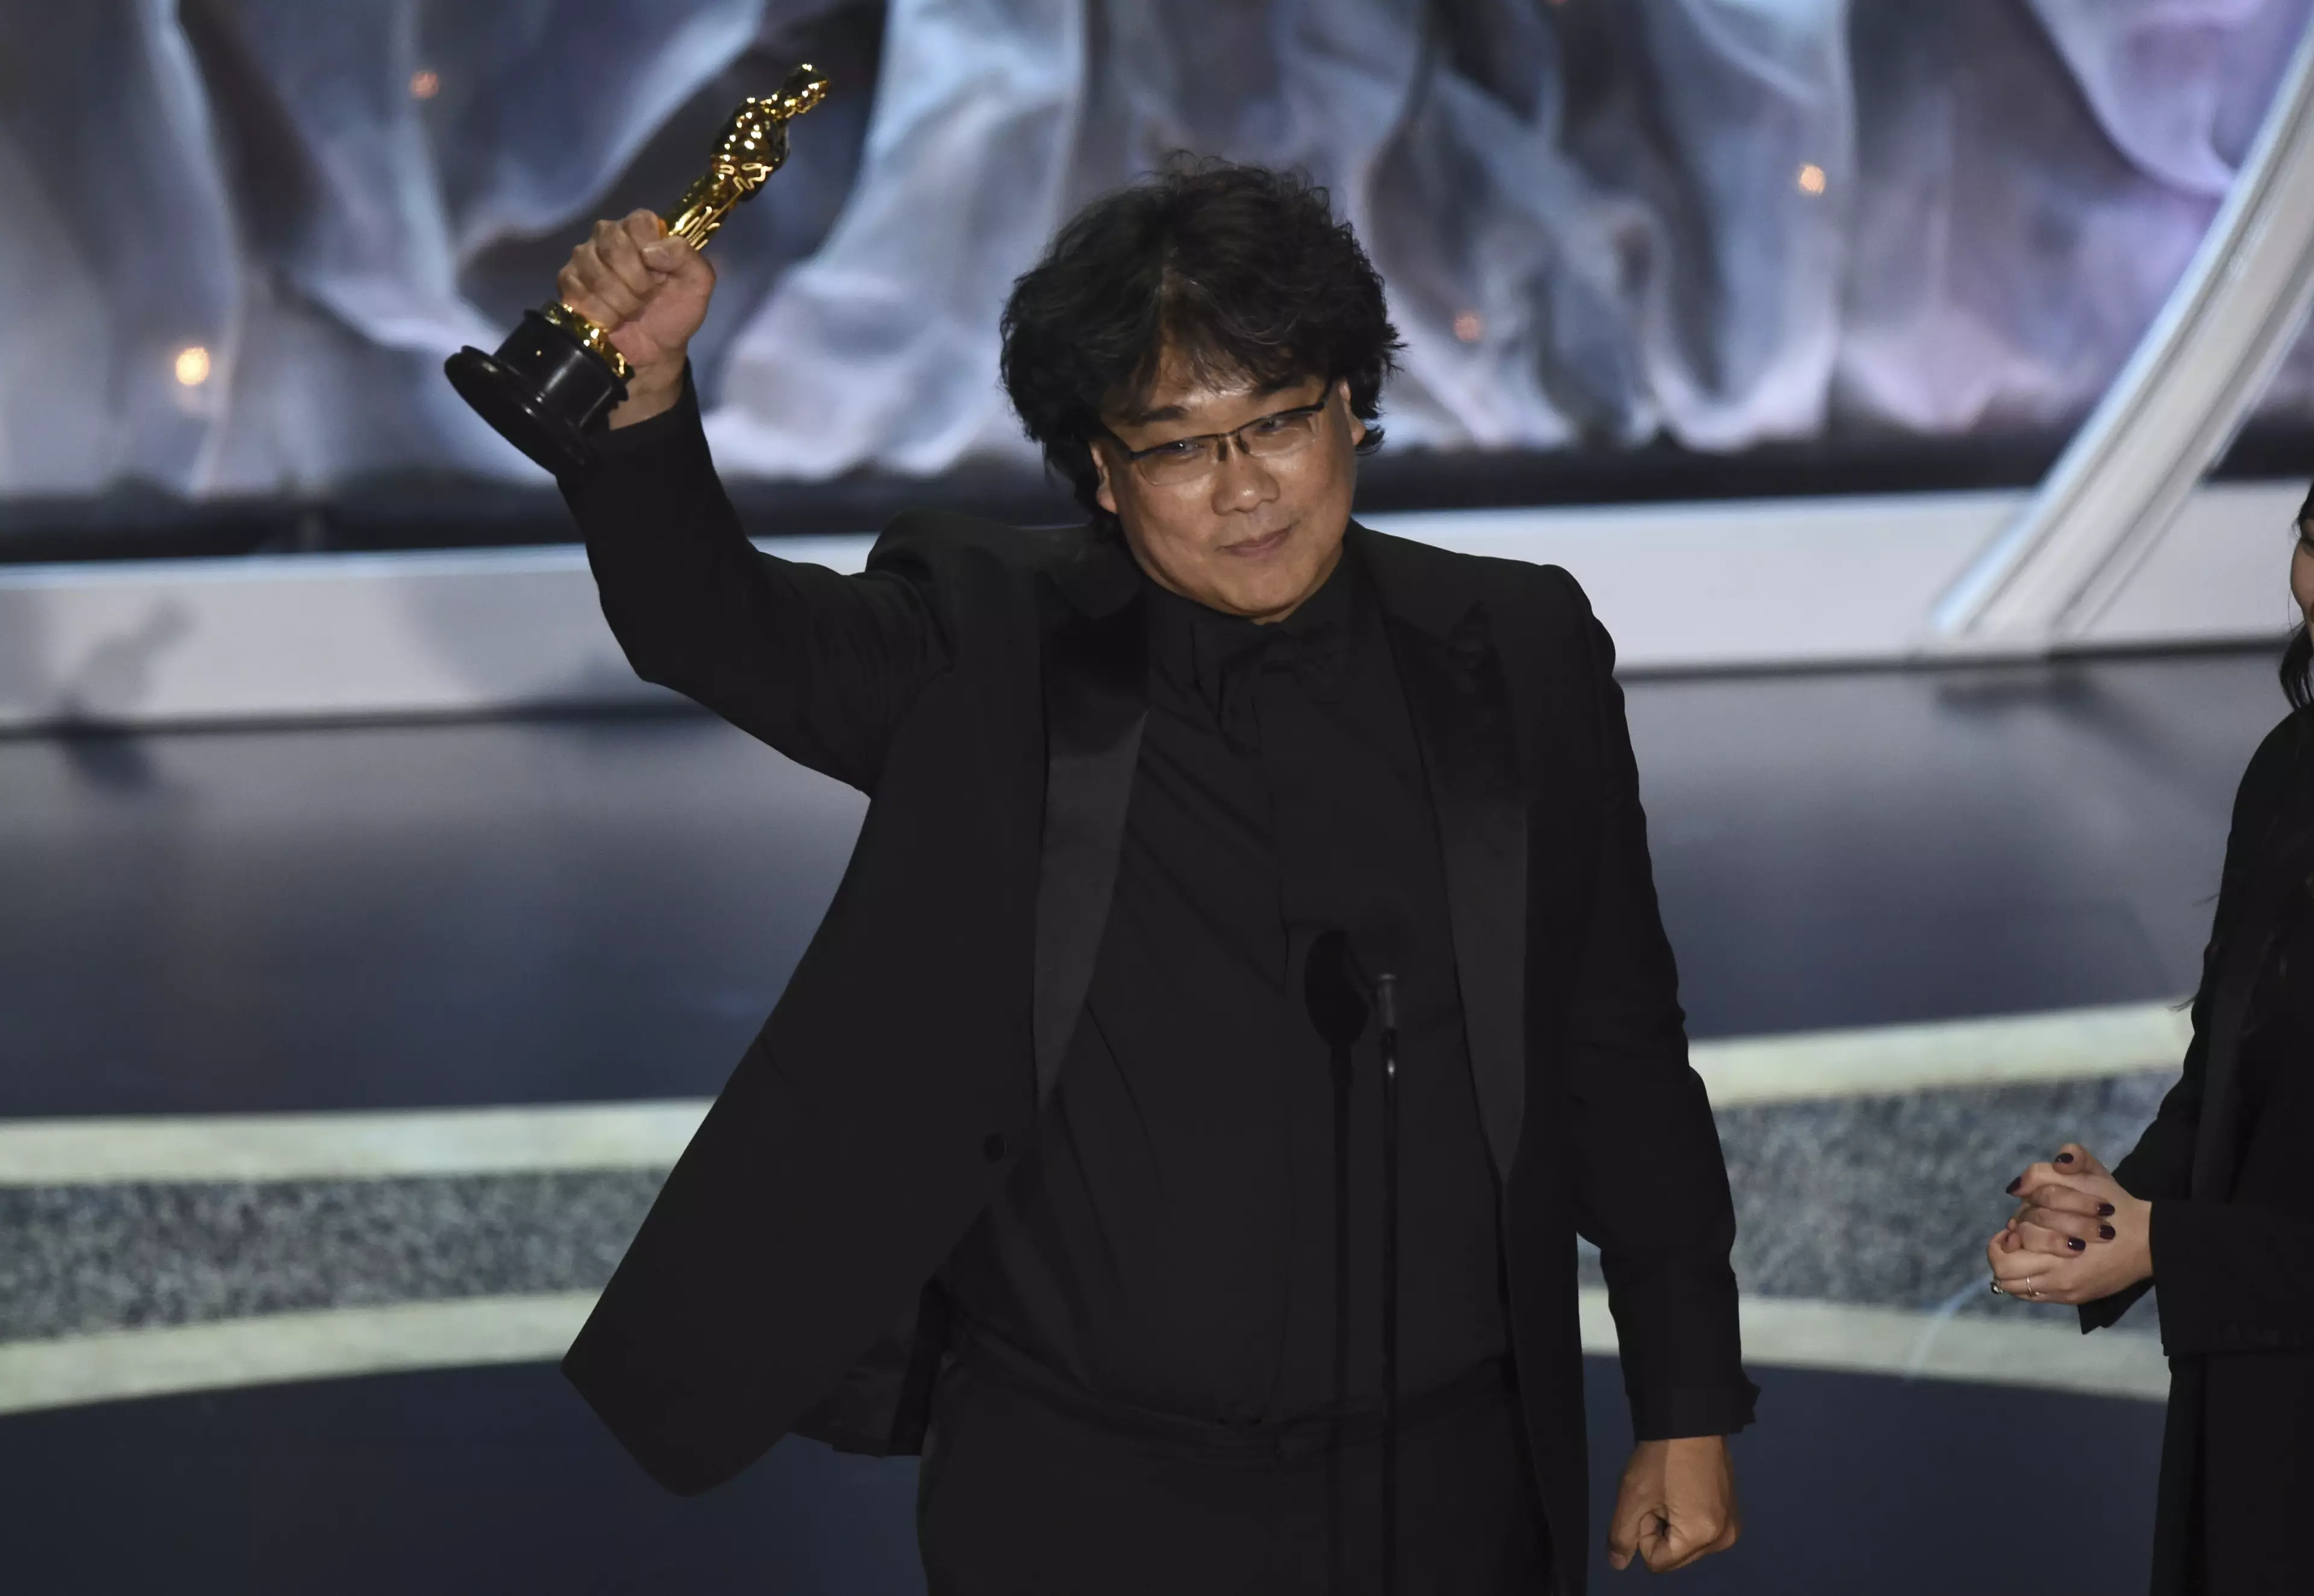 Bong Joon-ho picked up the award for Best Director earlier in the night.